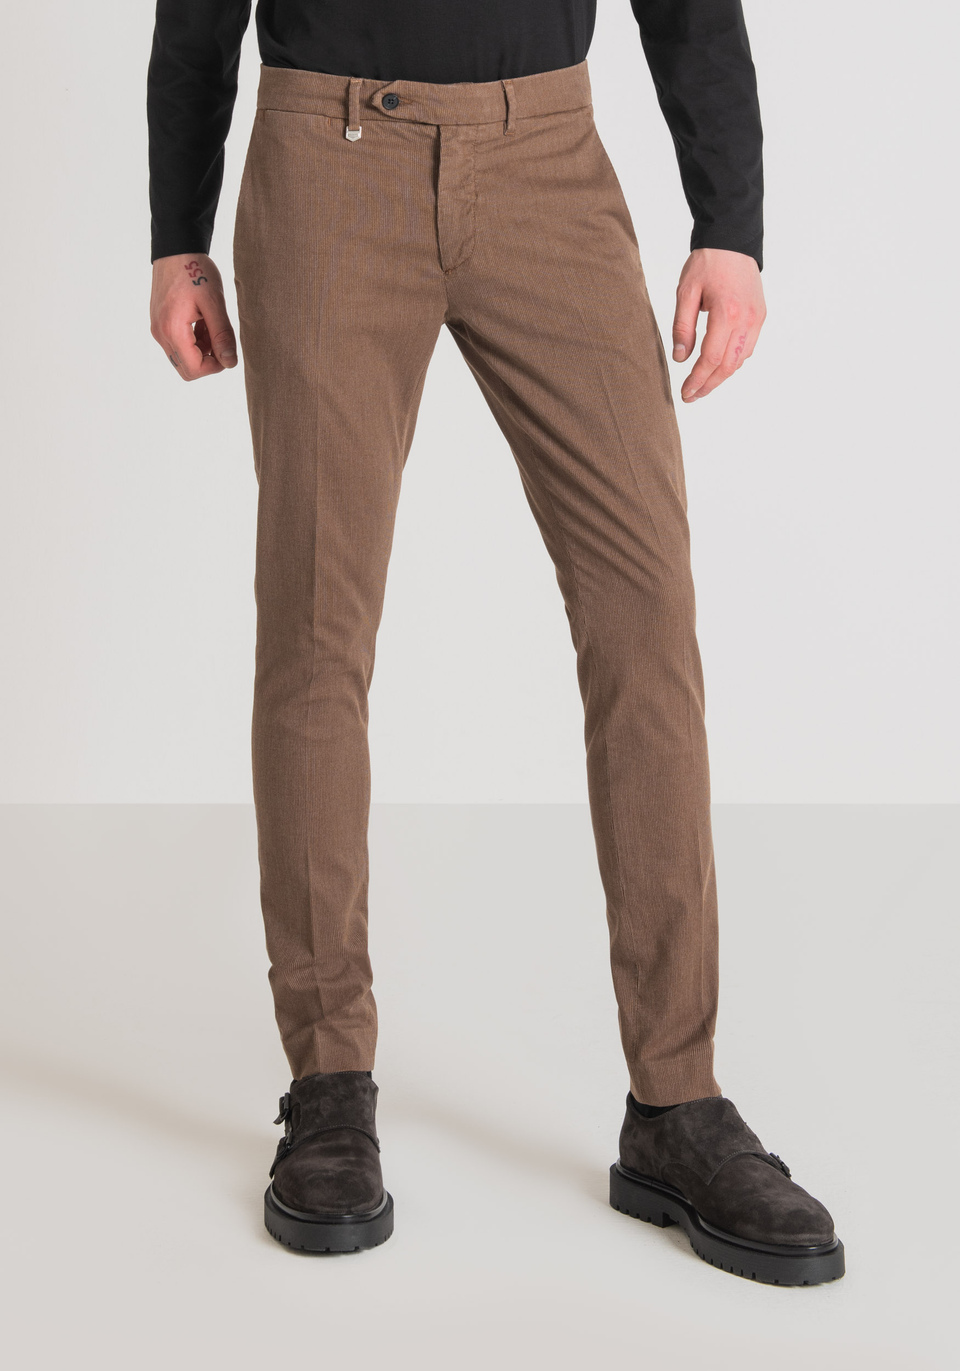 "BRYAN" SKINNY FIT TROUSERS IN MICRO-WEAVE STRETCH COTTON BLEND FABRIC - Antony Morato Online Shop